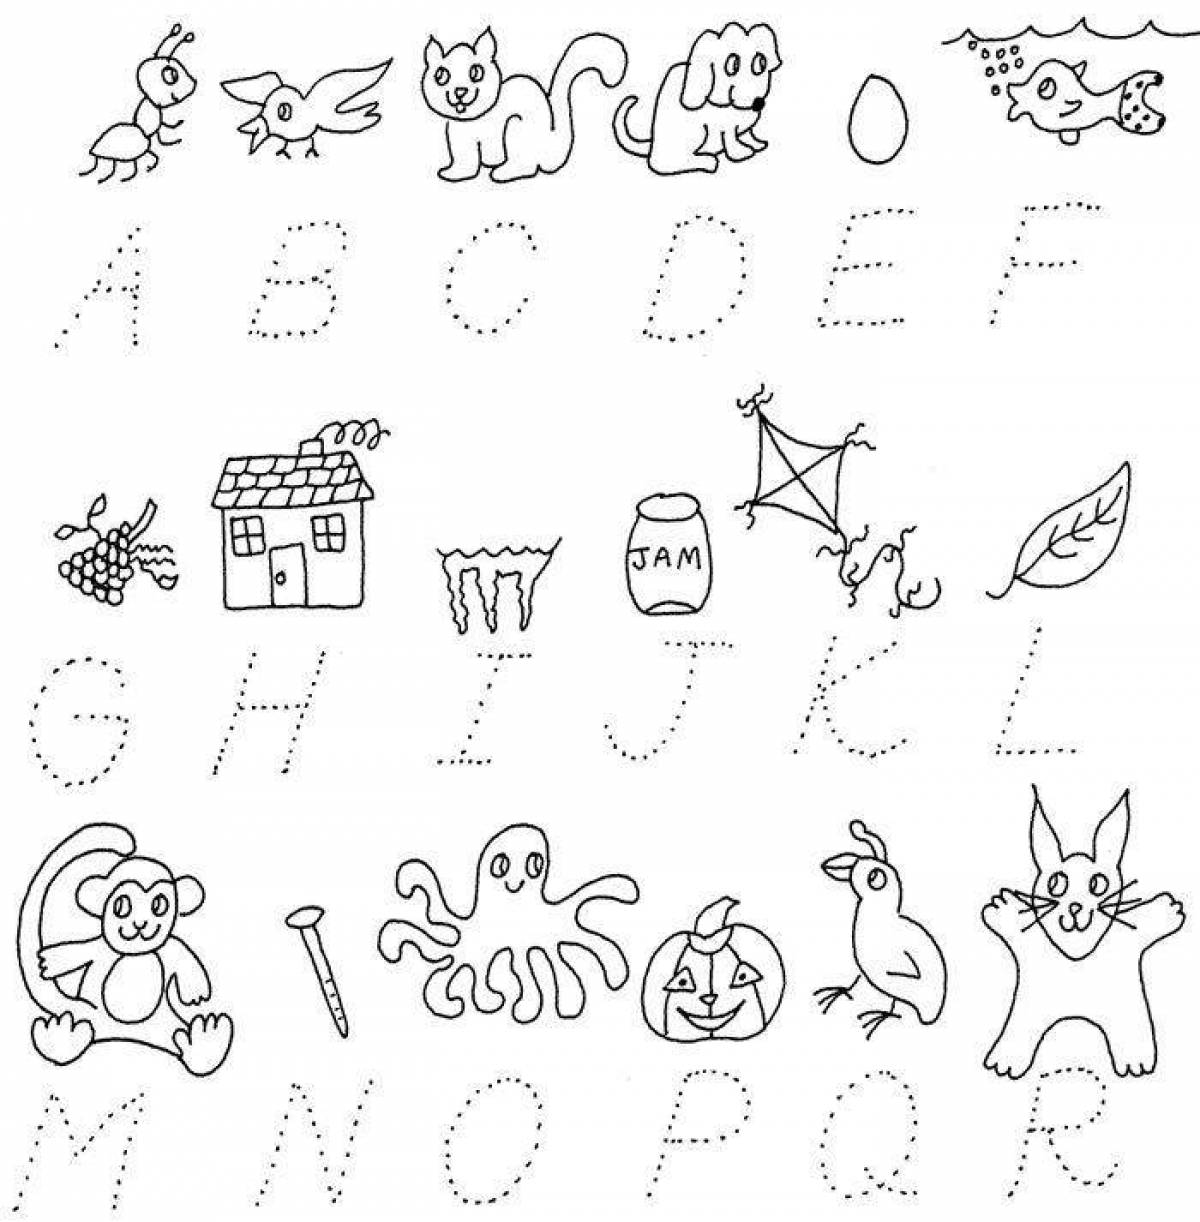 Playful alphabet coloring page